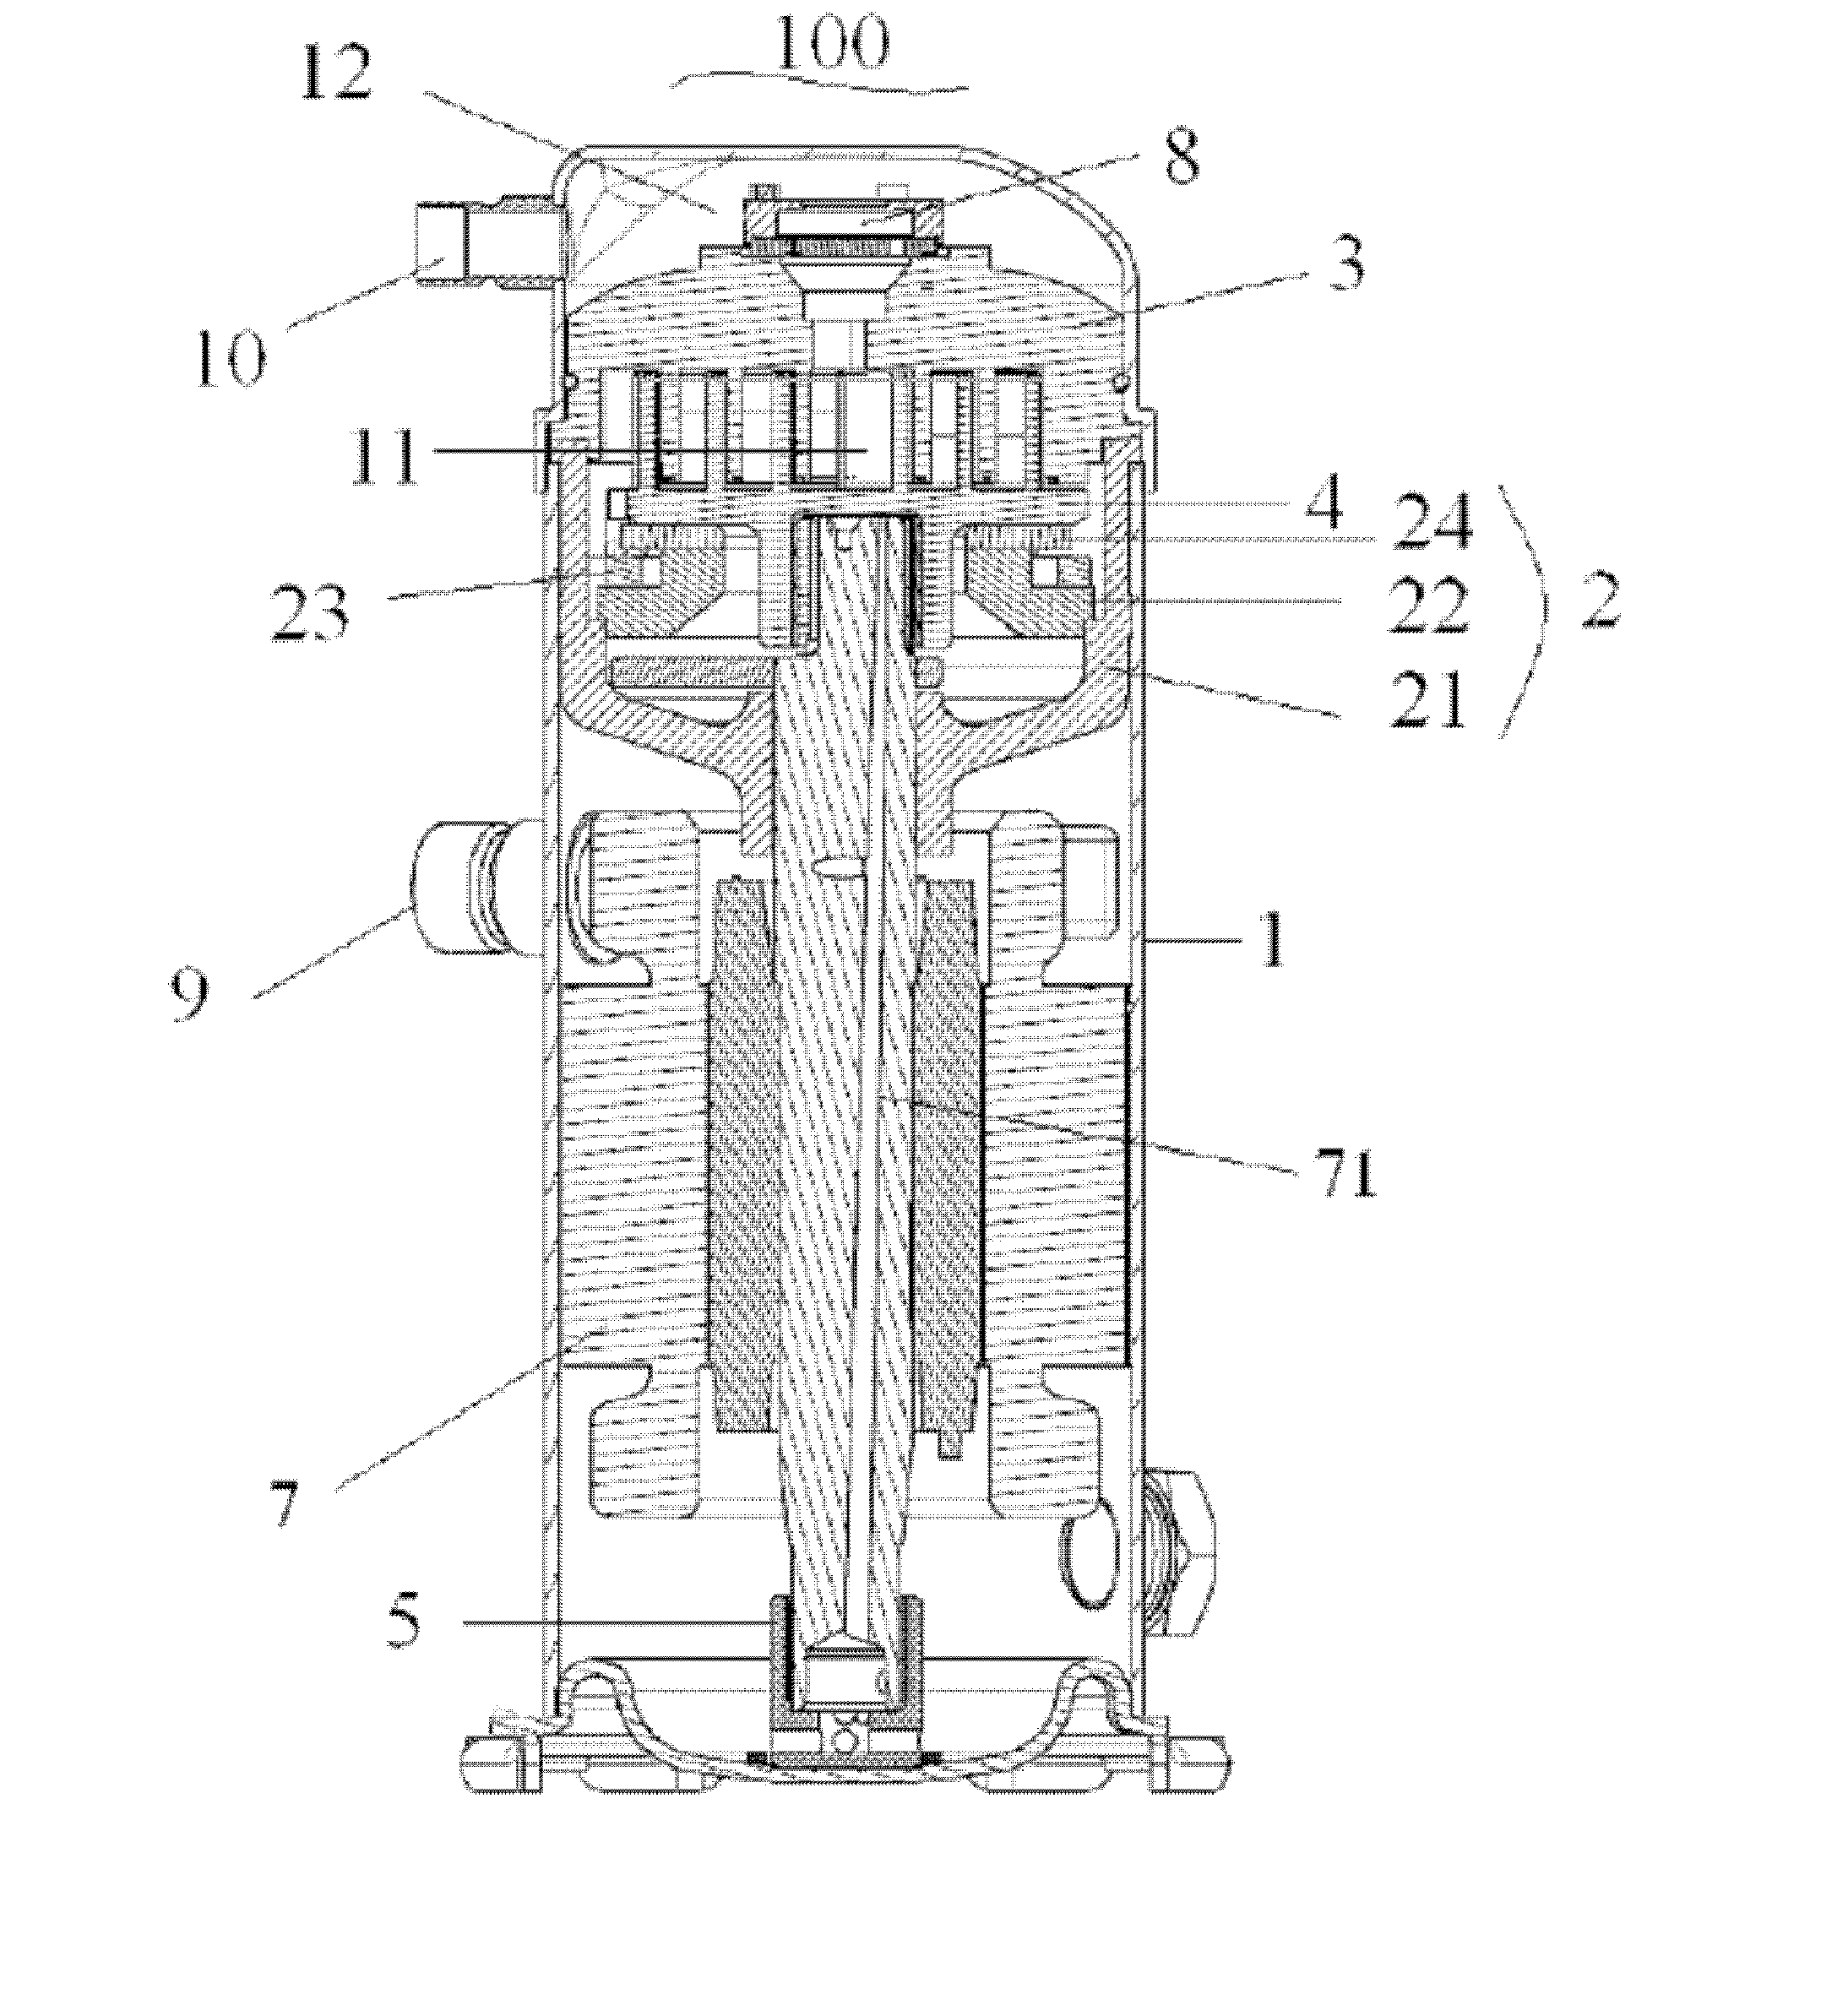 Stator, three-phase induction motor, and compressor